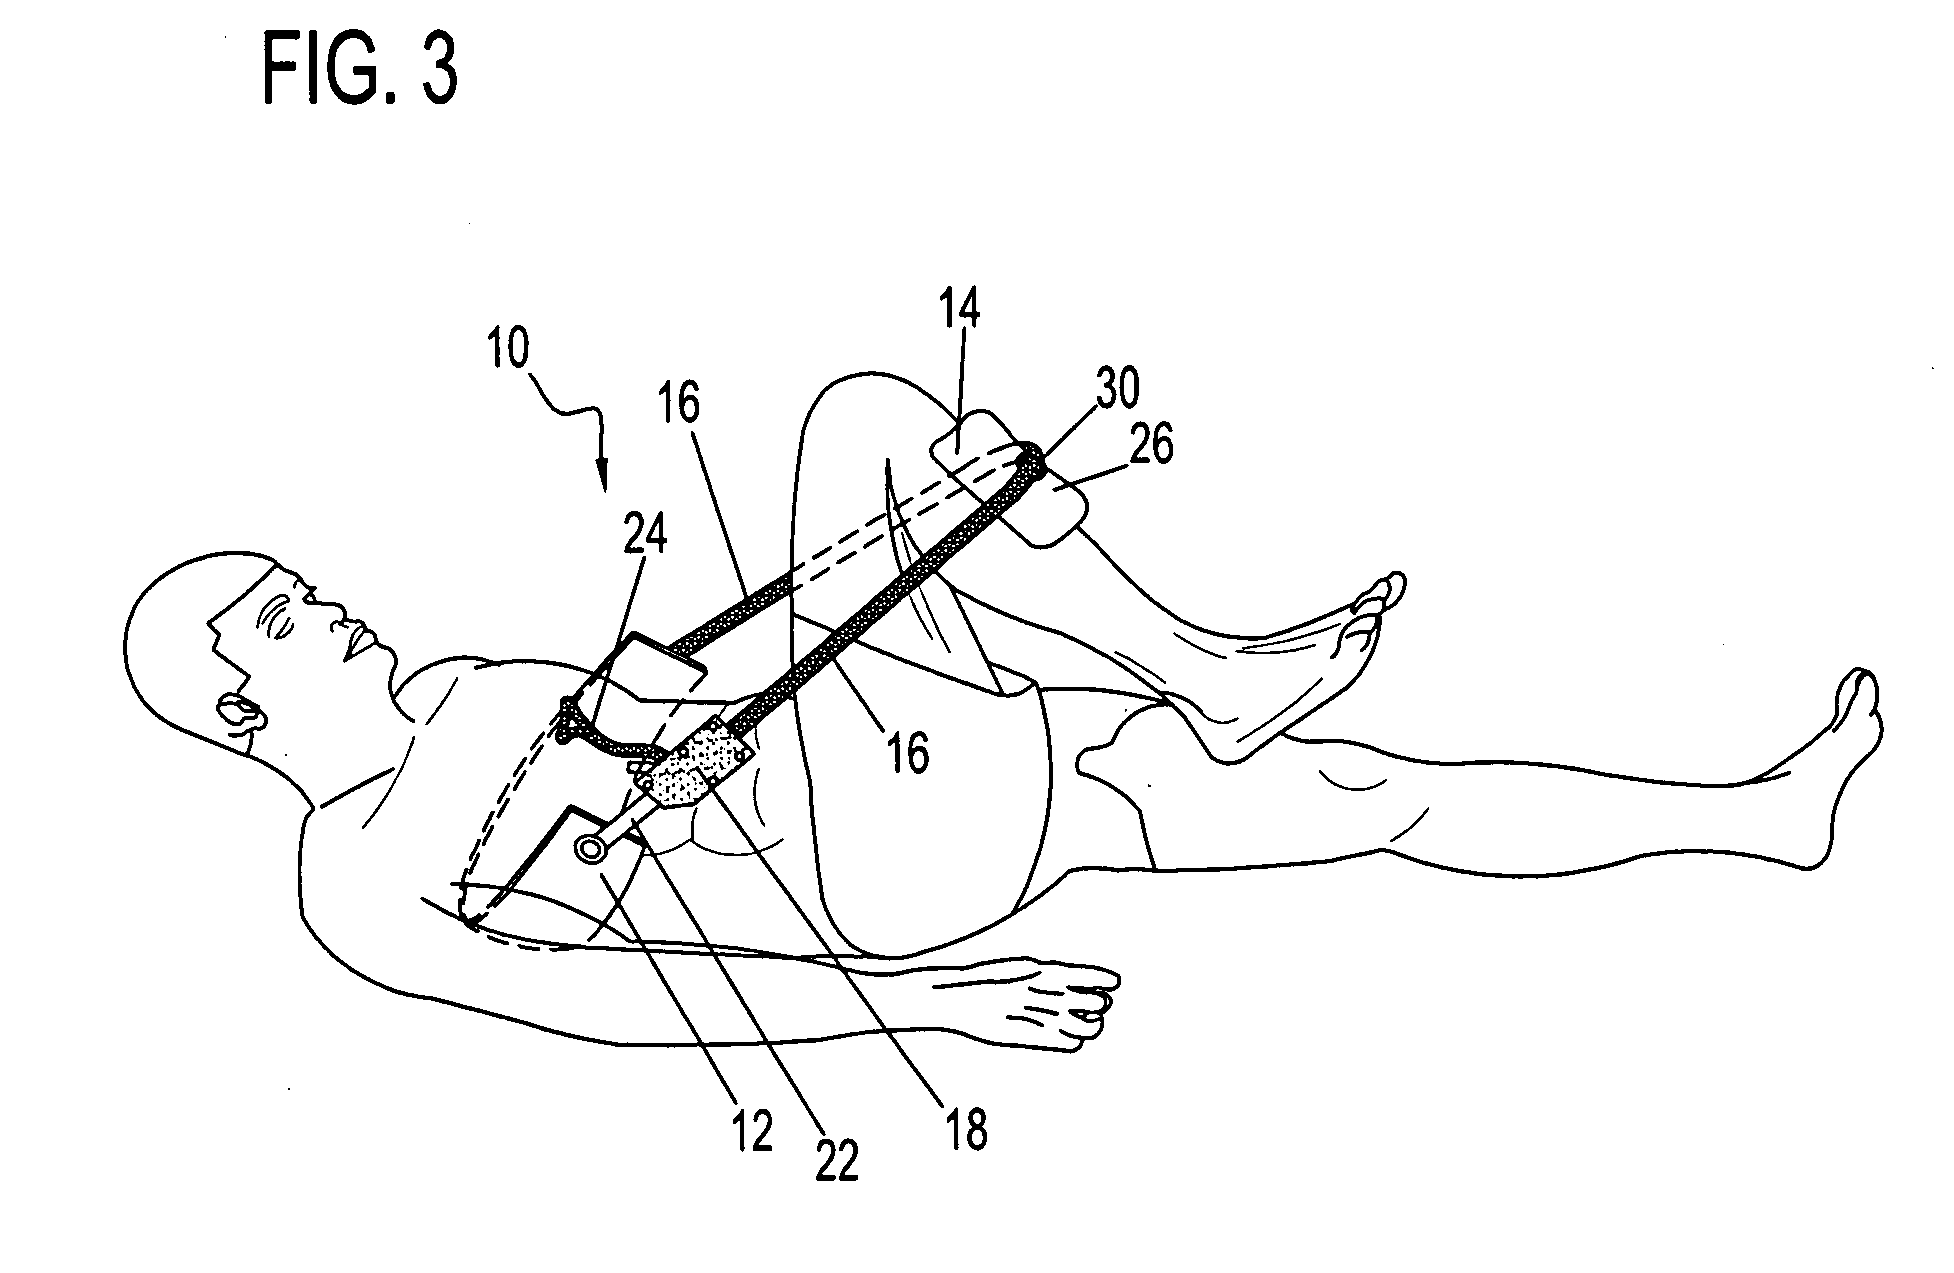 Portable lower-body stretching apparatus